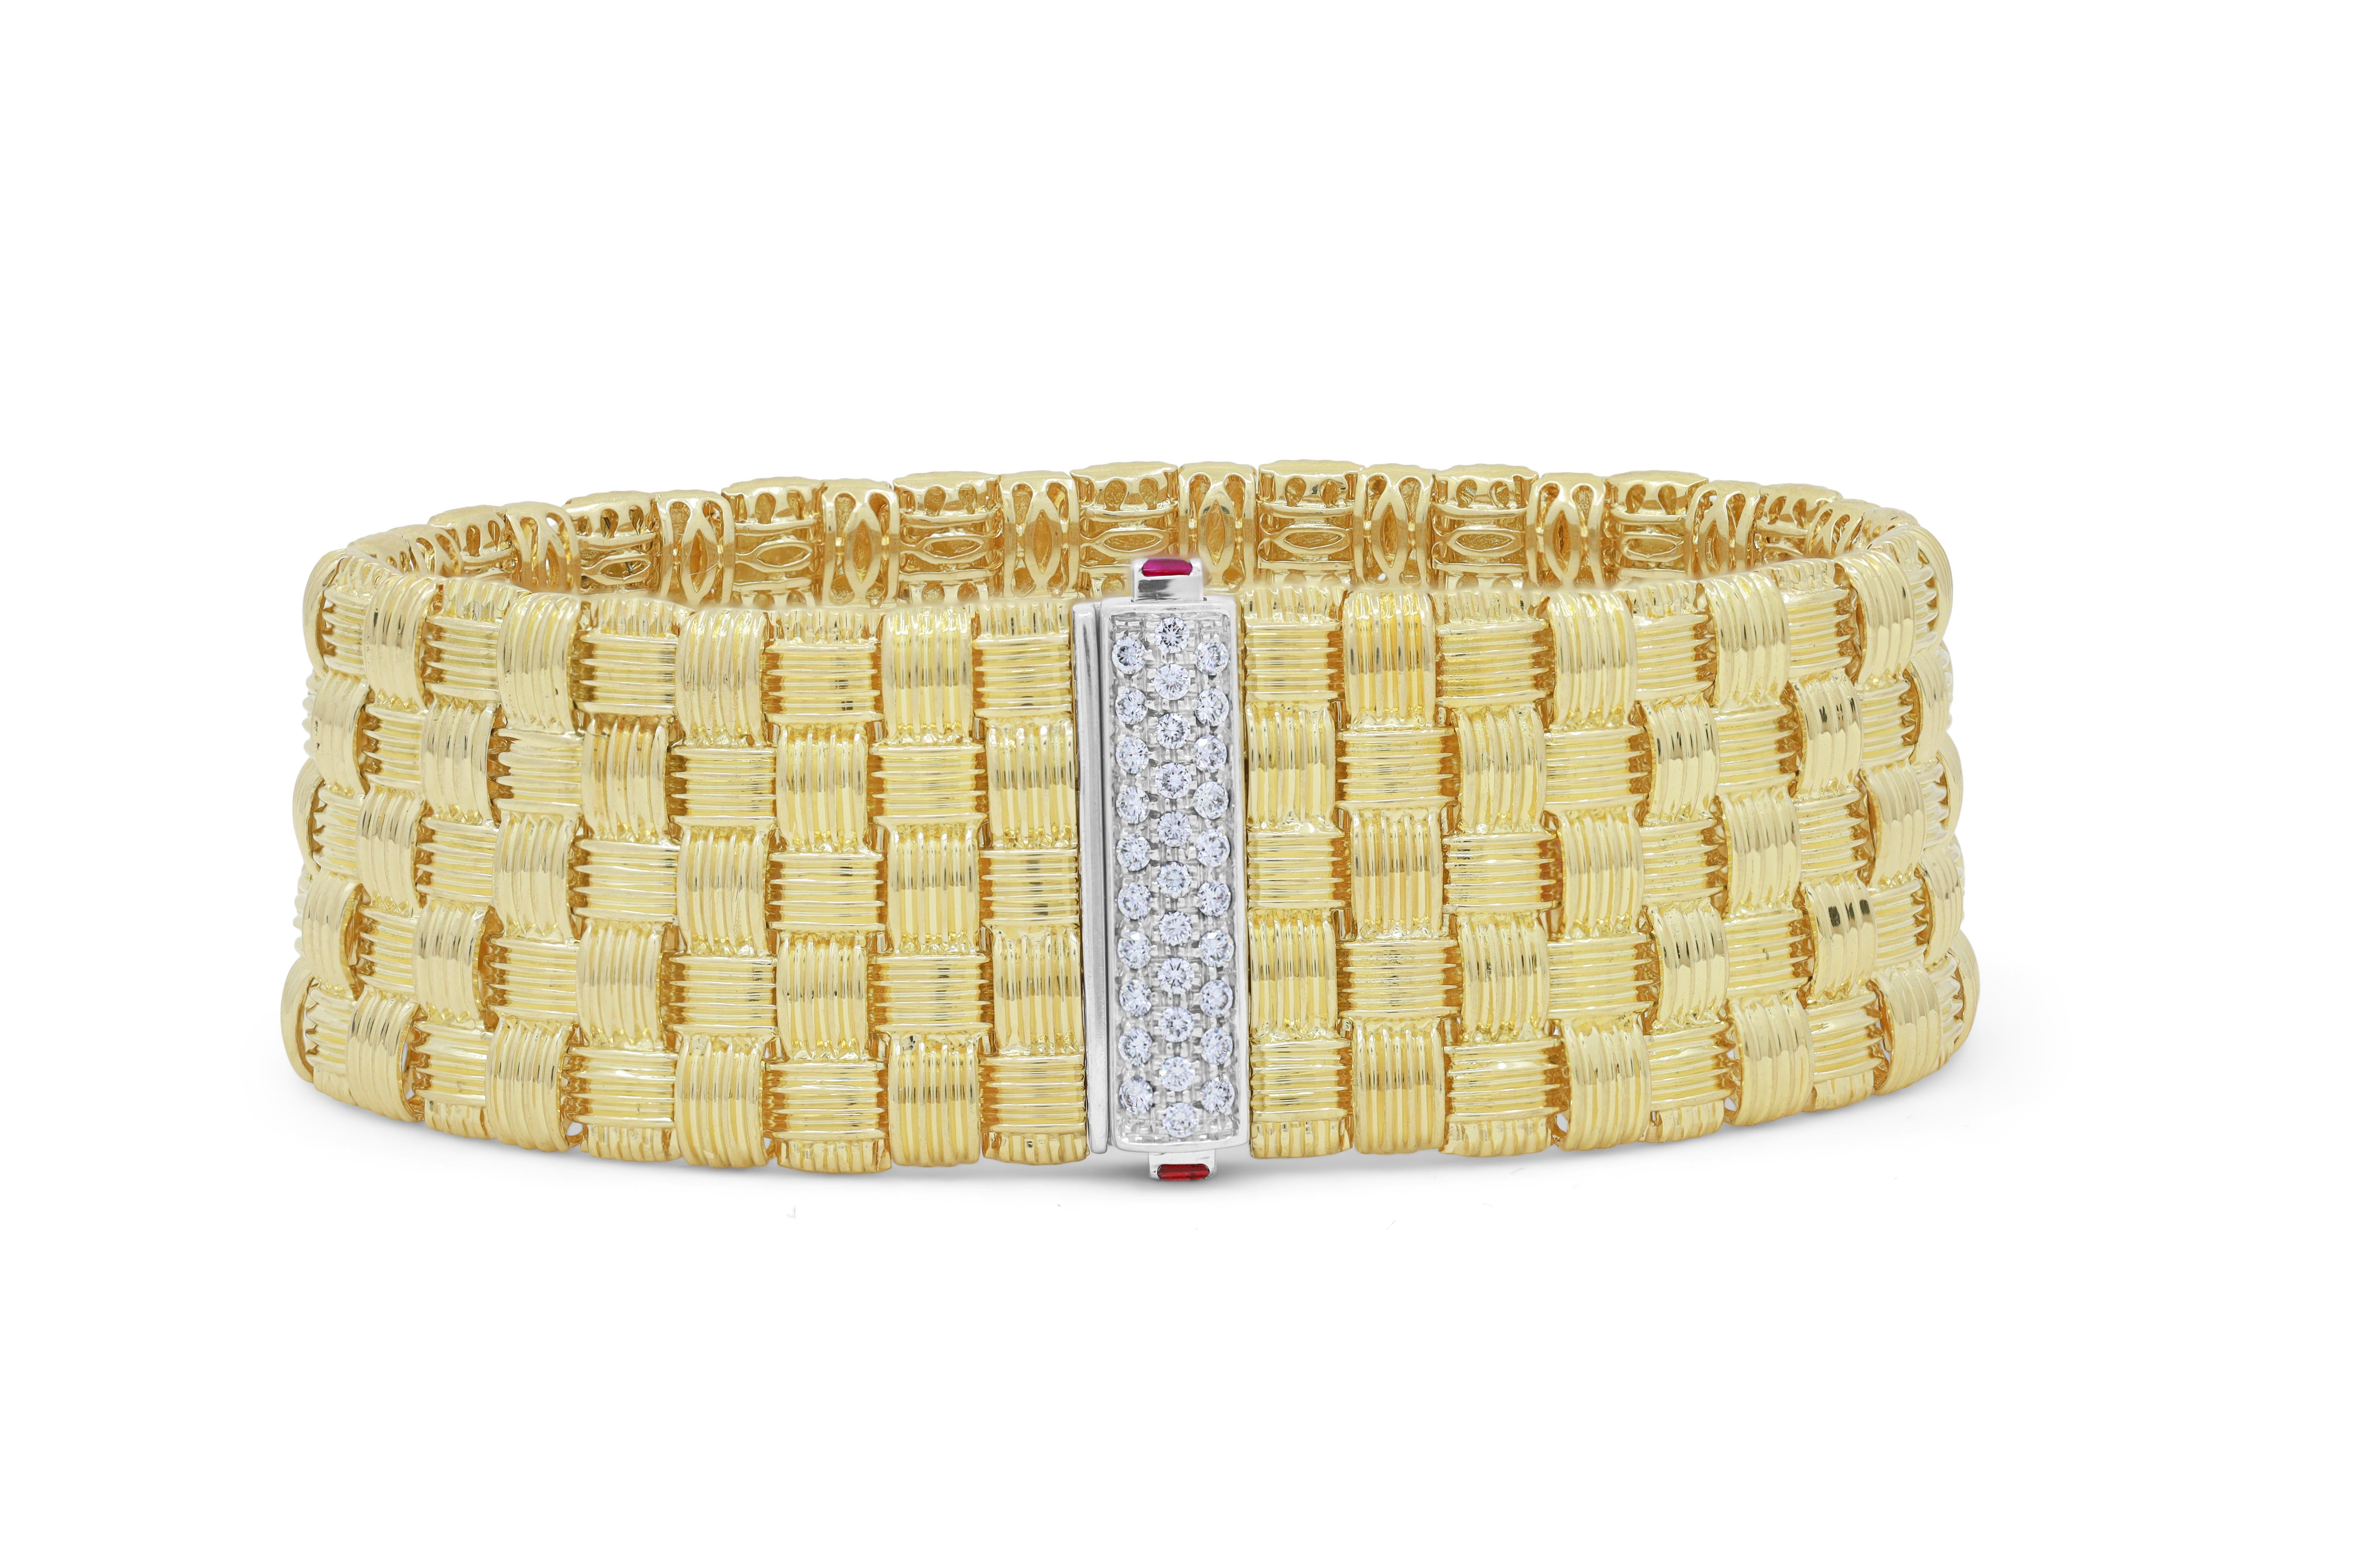 Diana M. 18KT Roberto coin bracelet woven design 87.26 grams with ruby and diamond  accent 


Diana M. is a leading supplier of top-quality fine jewelry for over 35 years.
Diana M is one-stop shop for all your jewelry shopping, carrying line of